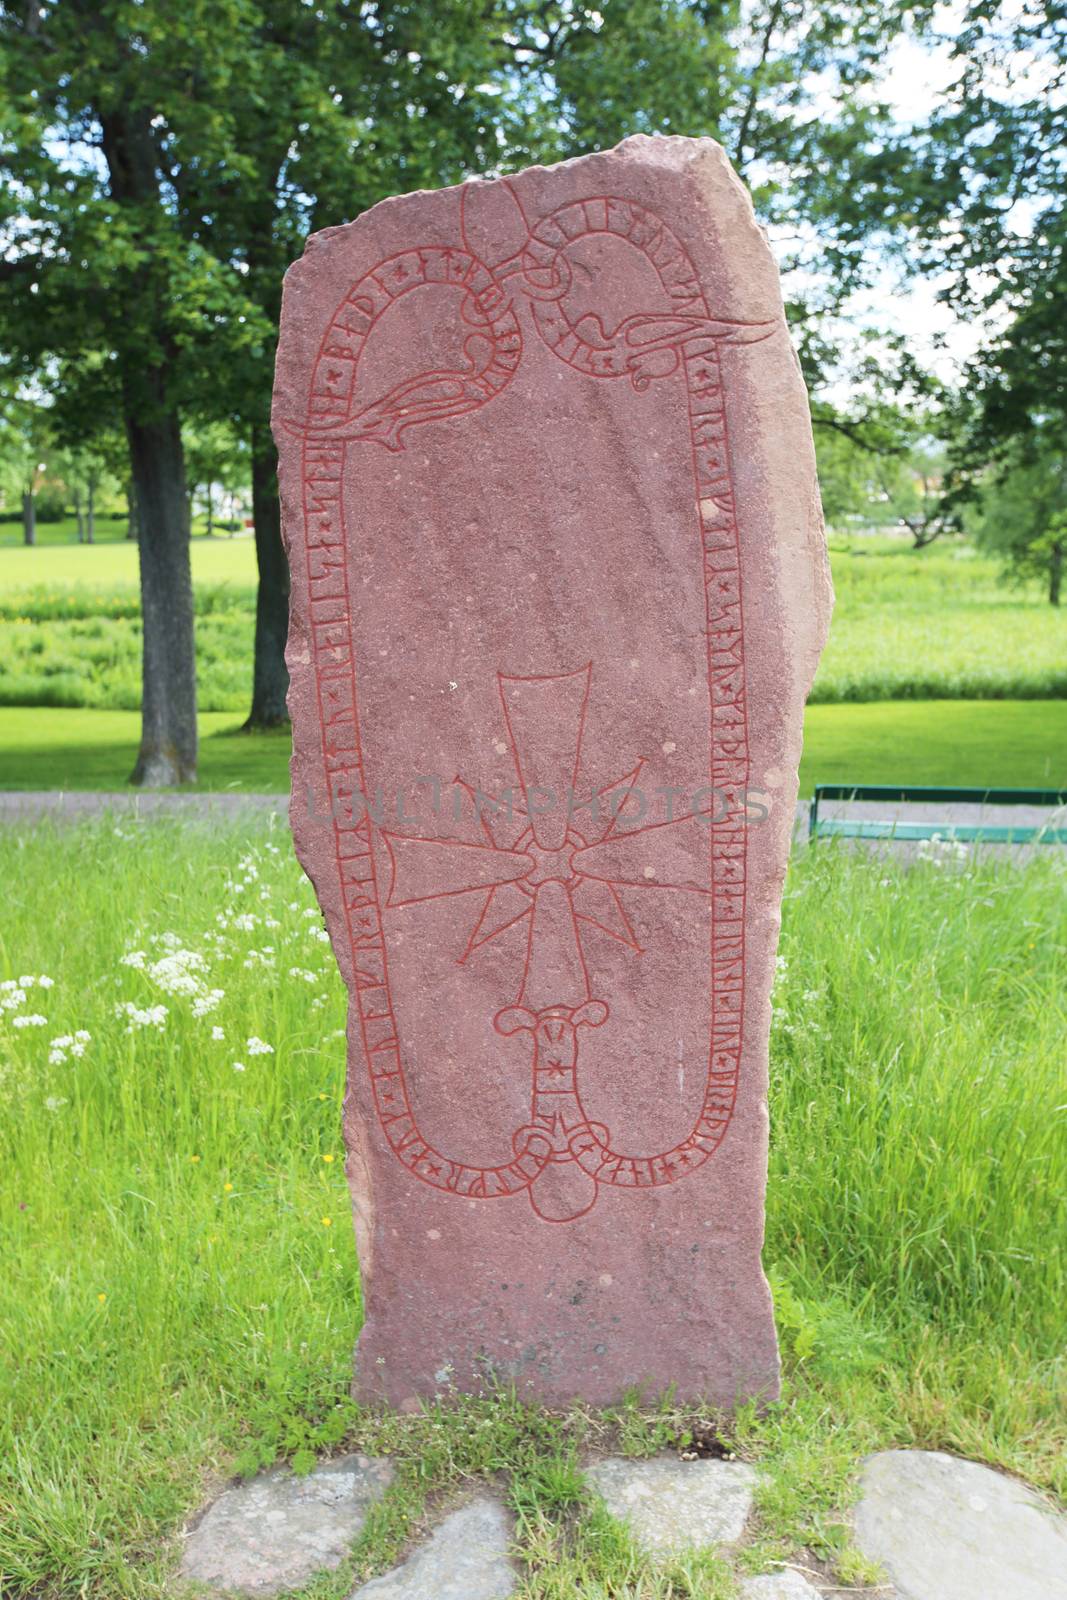 Runic inscriptions on a runestone in Mariefred, Sweden